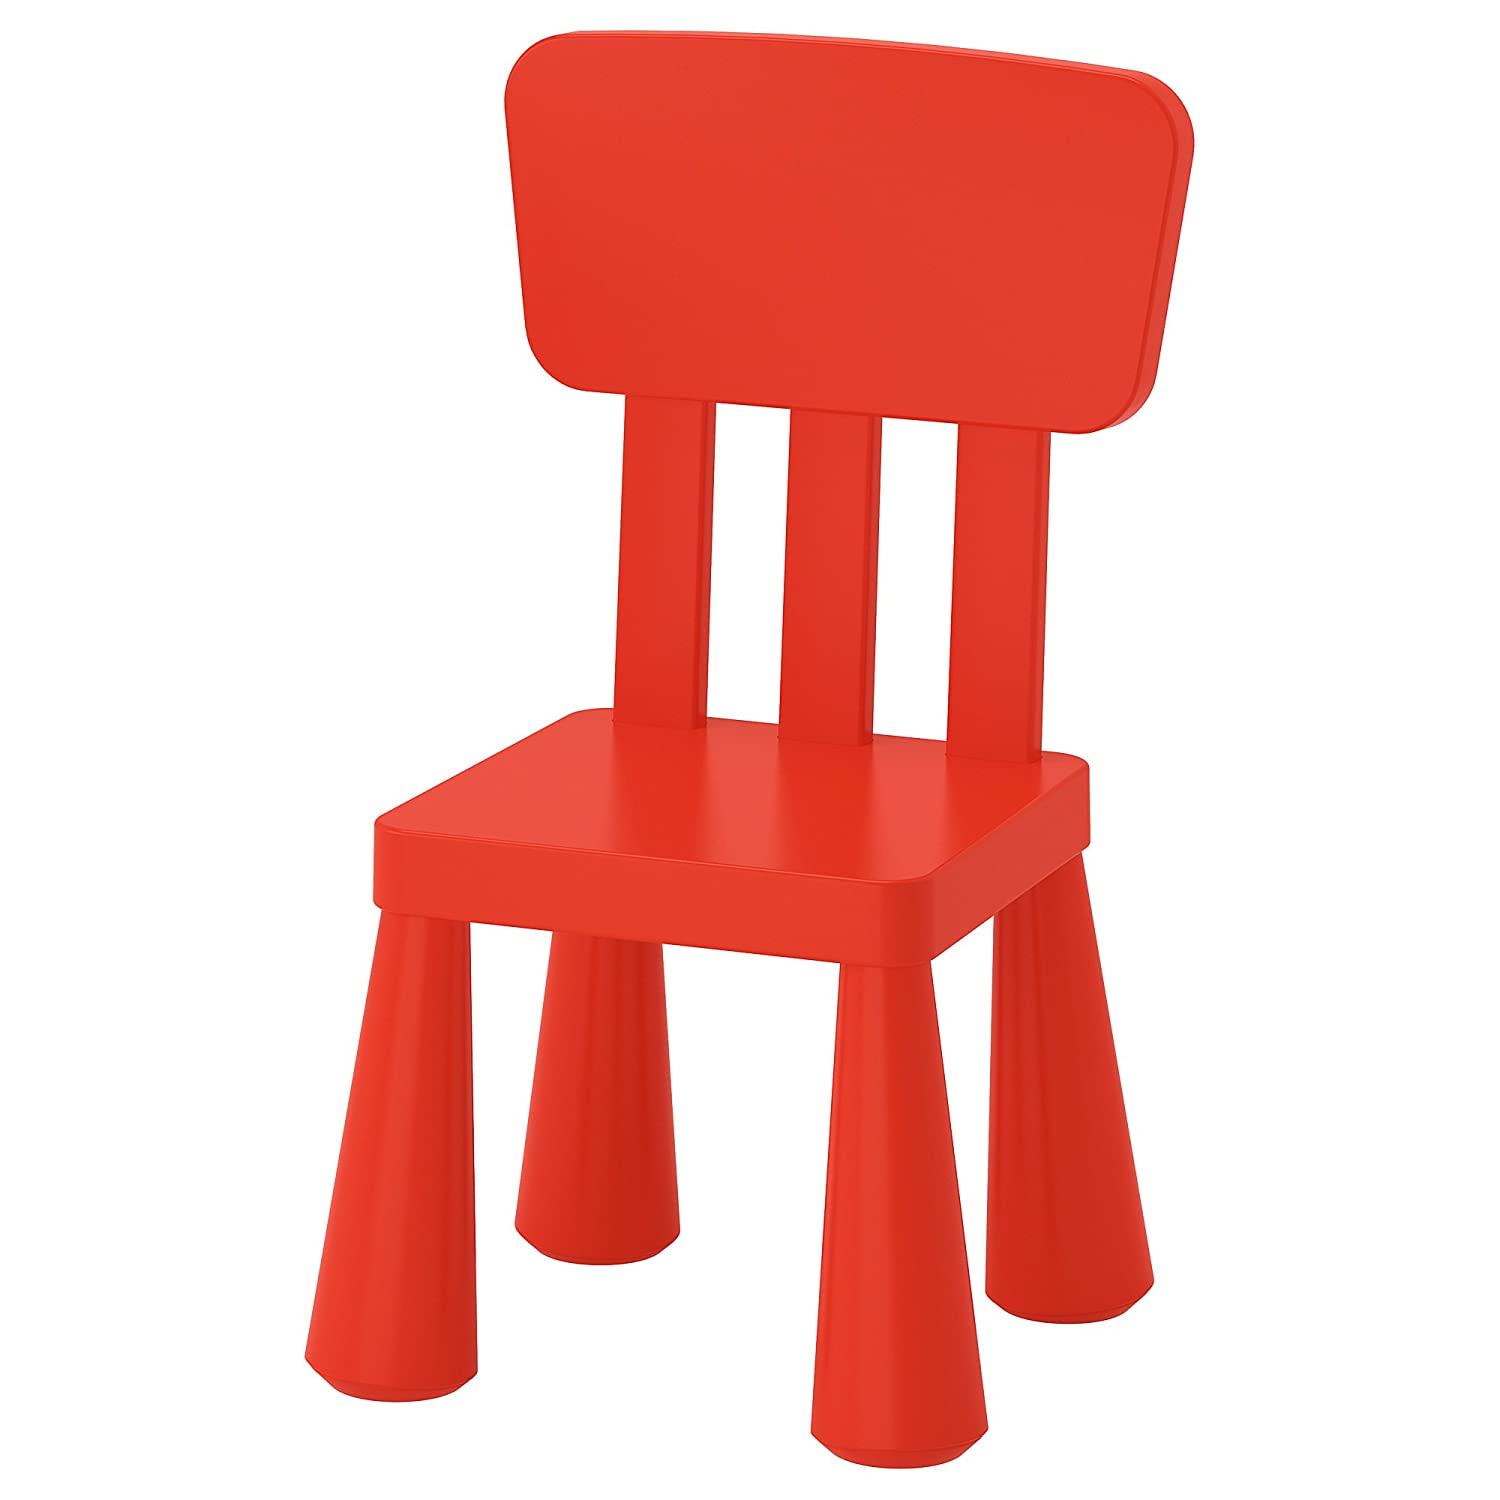 Ikea Mammut 403.653.66 Childrens Chair Made Of Plastic With High Backrest 